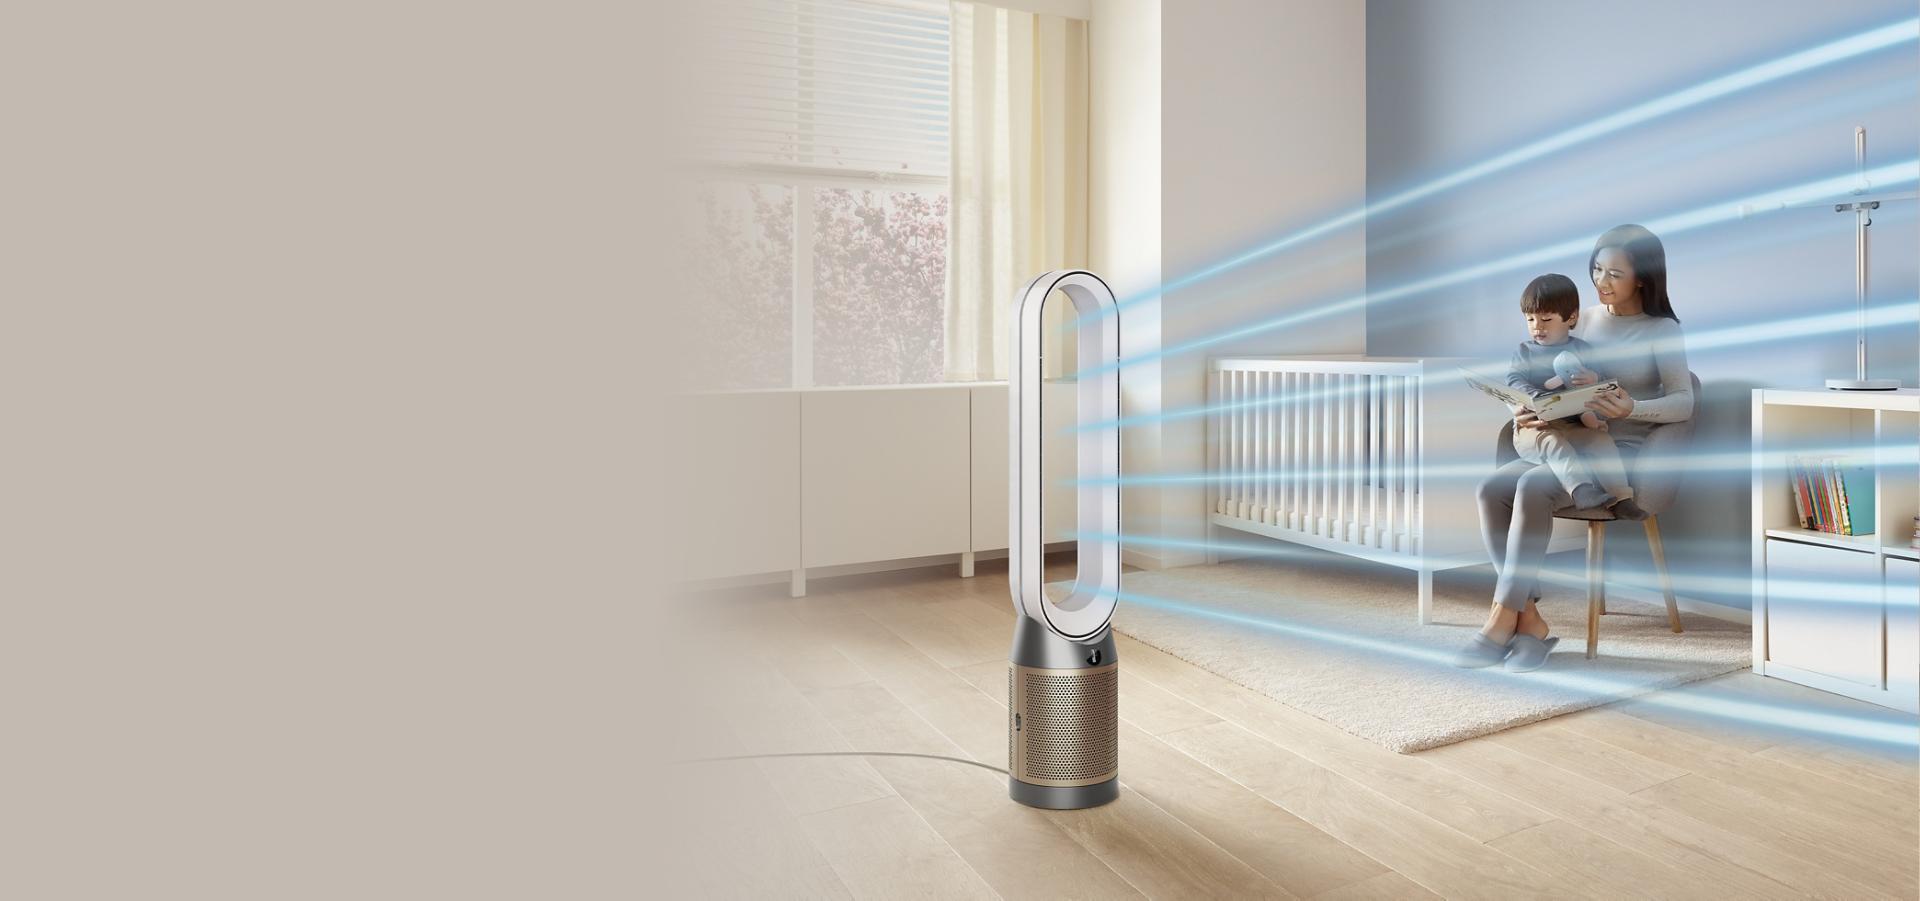 Dyson purifier purifying the air in a child's bedroom